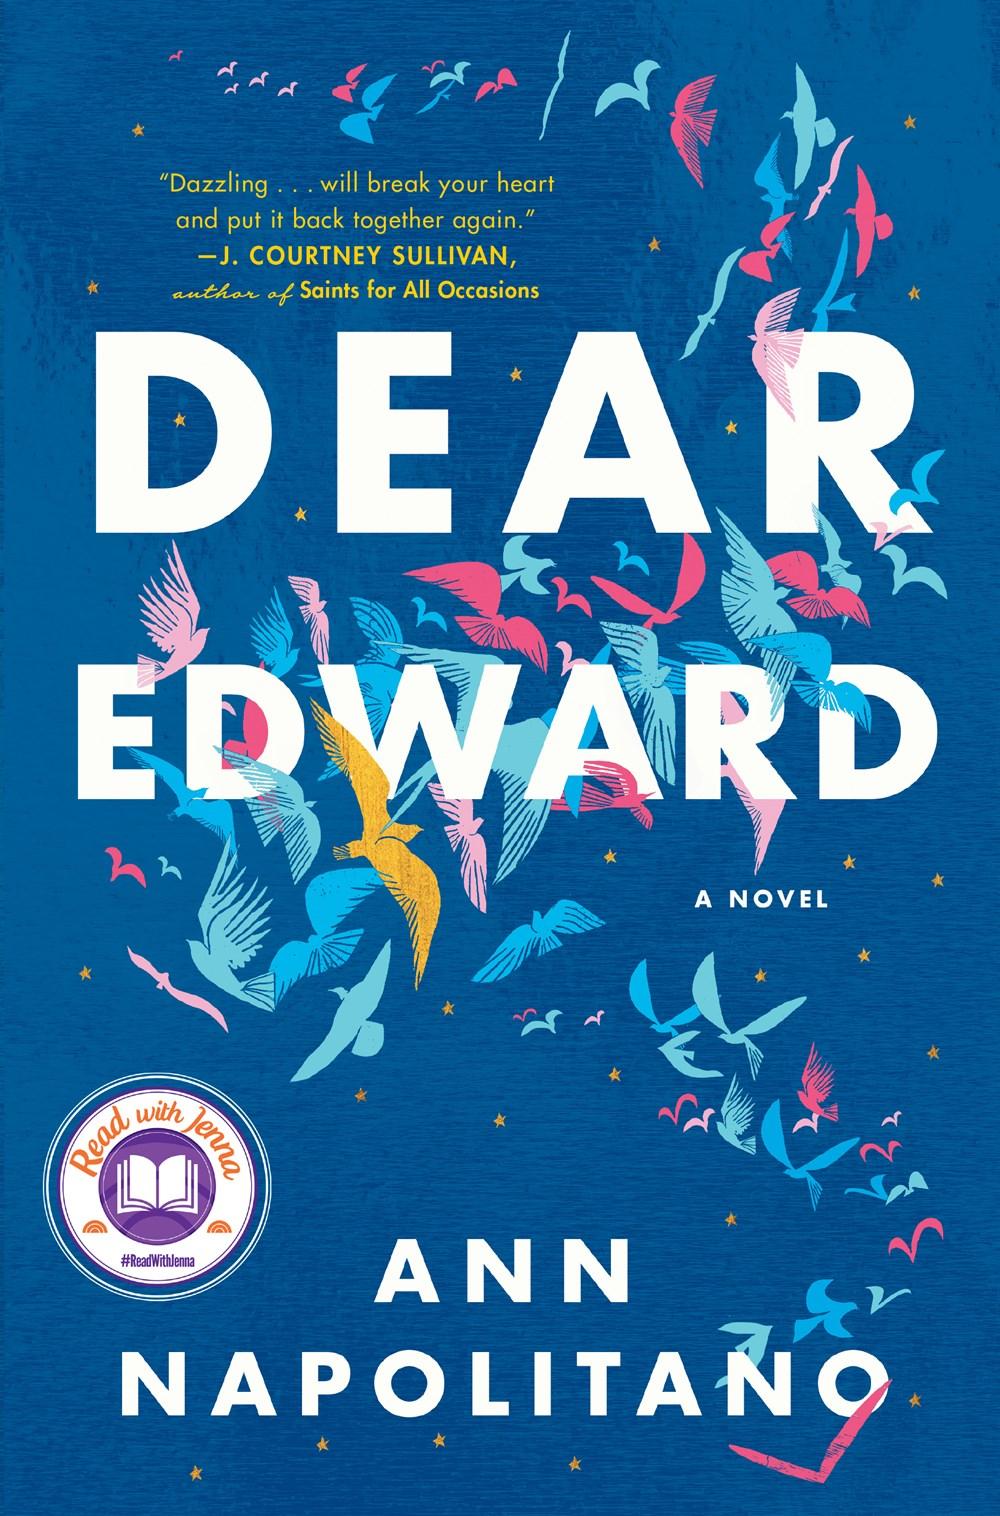 book review of dear edward